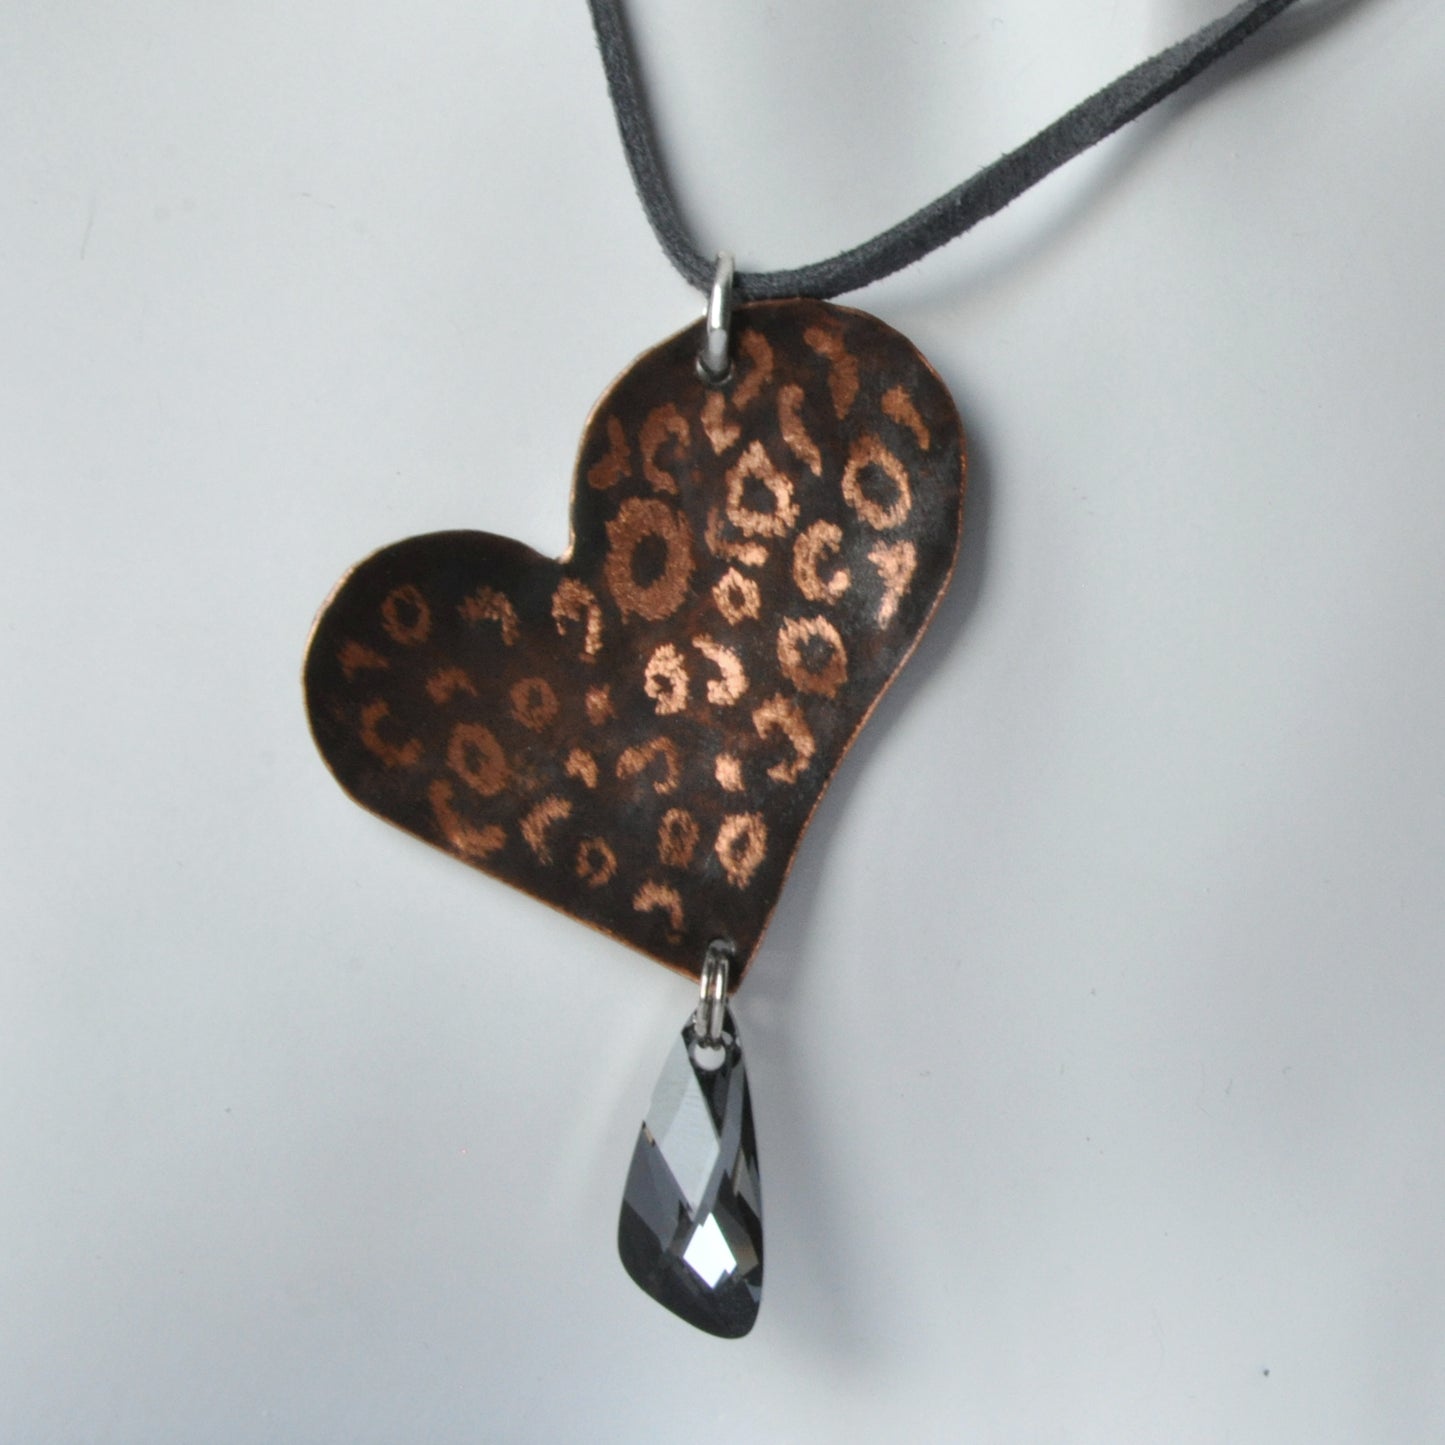 Copper Heart Pendant Necklace with Leopard Spotted Engraving and Swarovski Crystal 'Wild Heart'